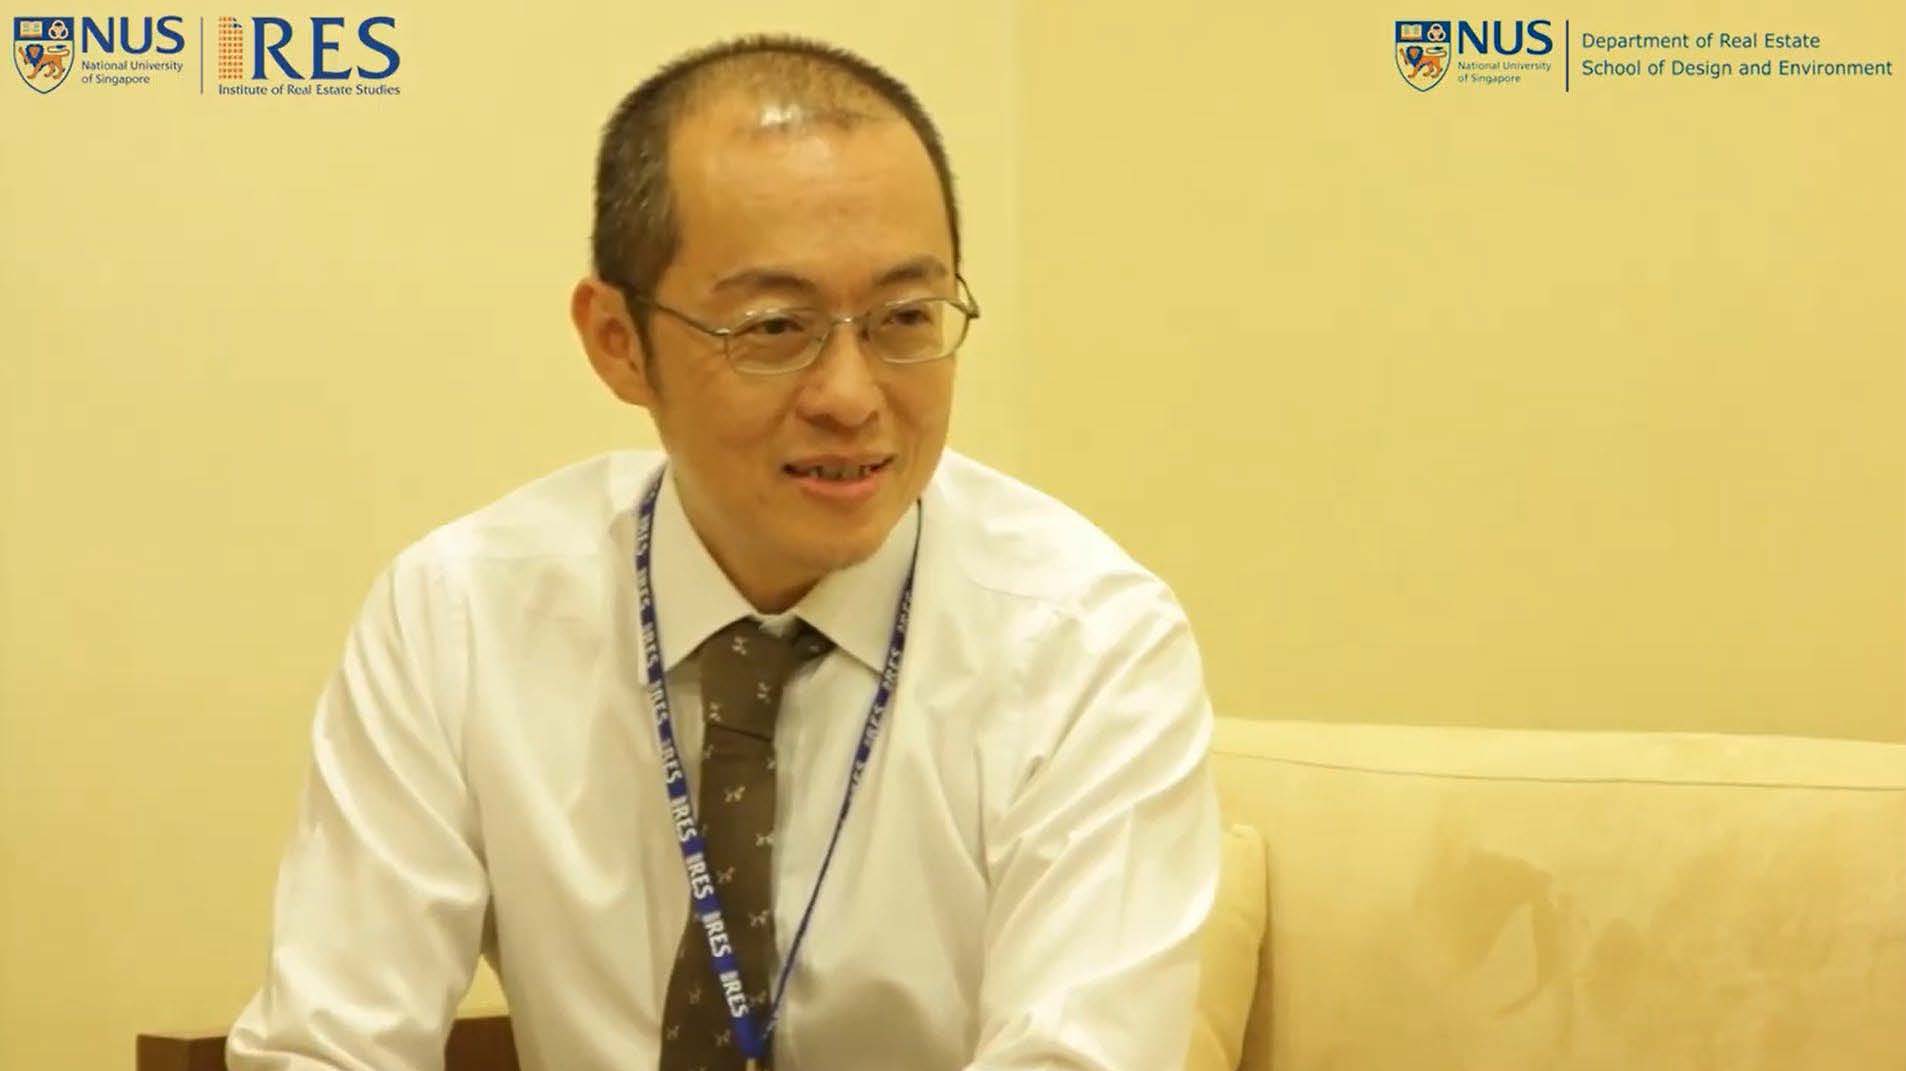 Interview with Dr. Chua Yang Liang